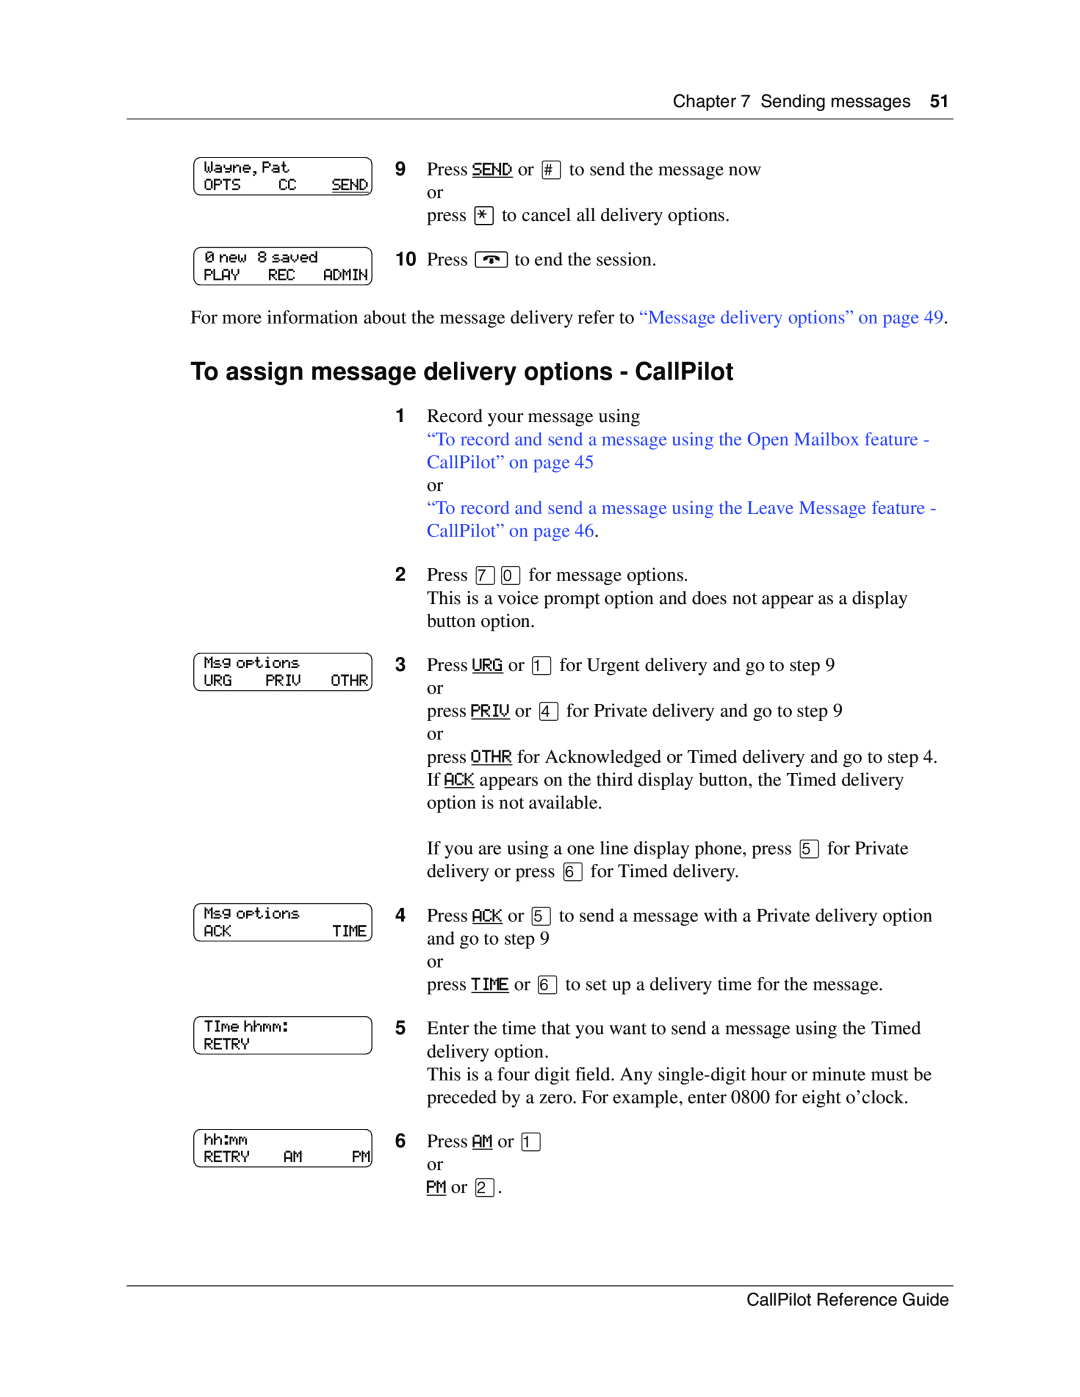 Nortel Networks To assign message delivery options - CallPilot, Press SEND or £to send the message now, Press AM or ⁄ 